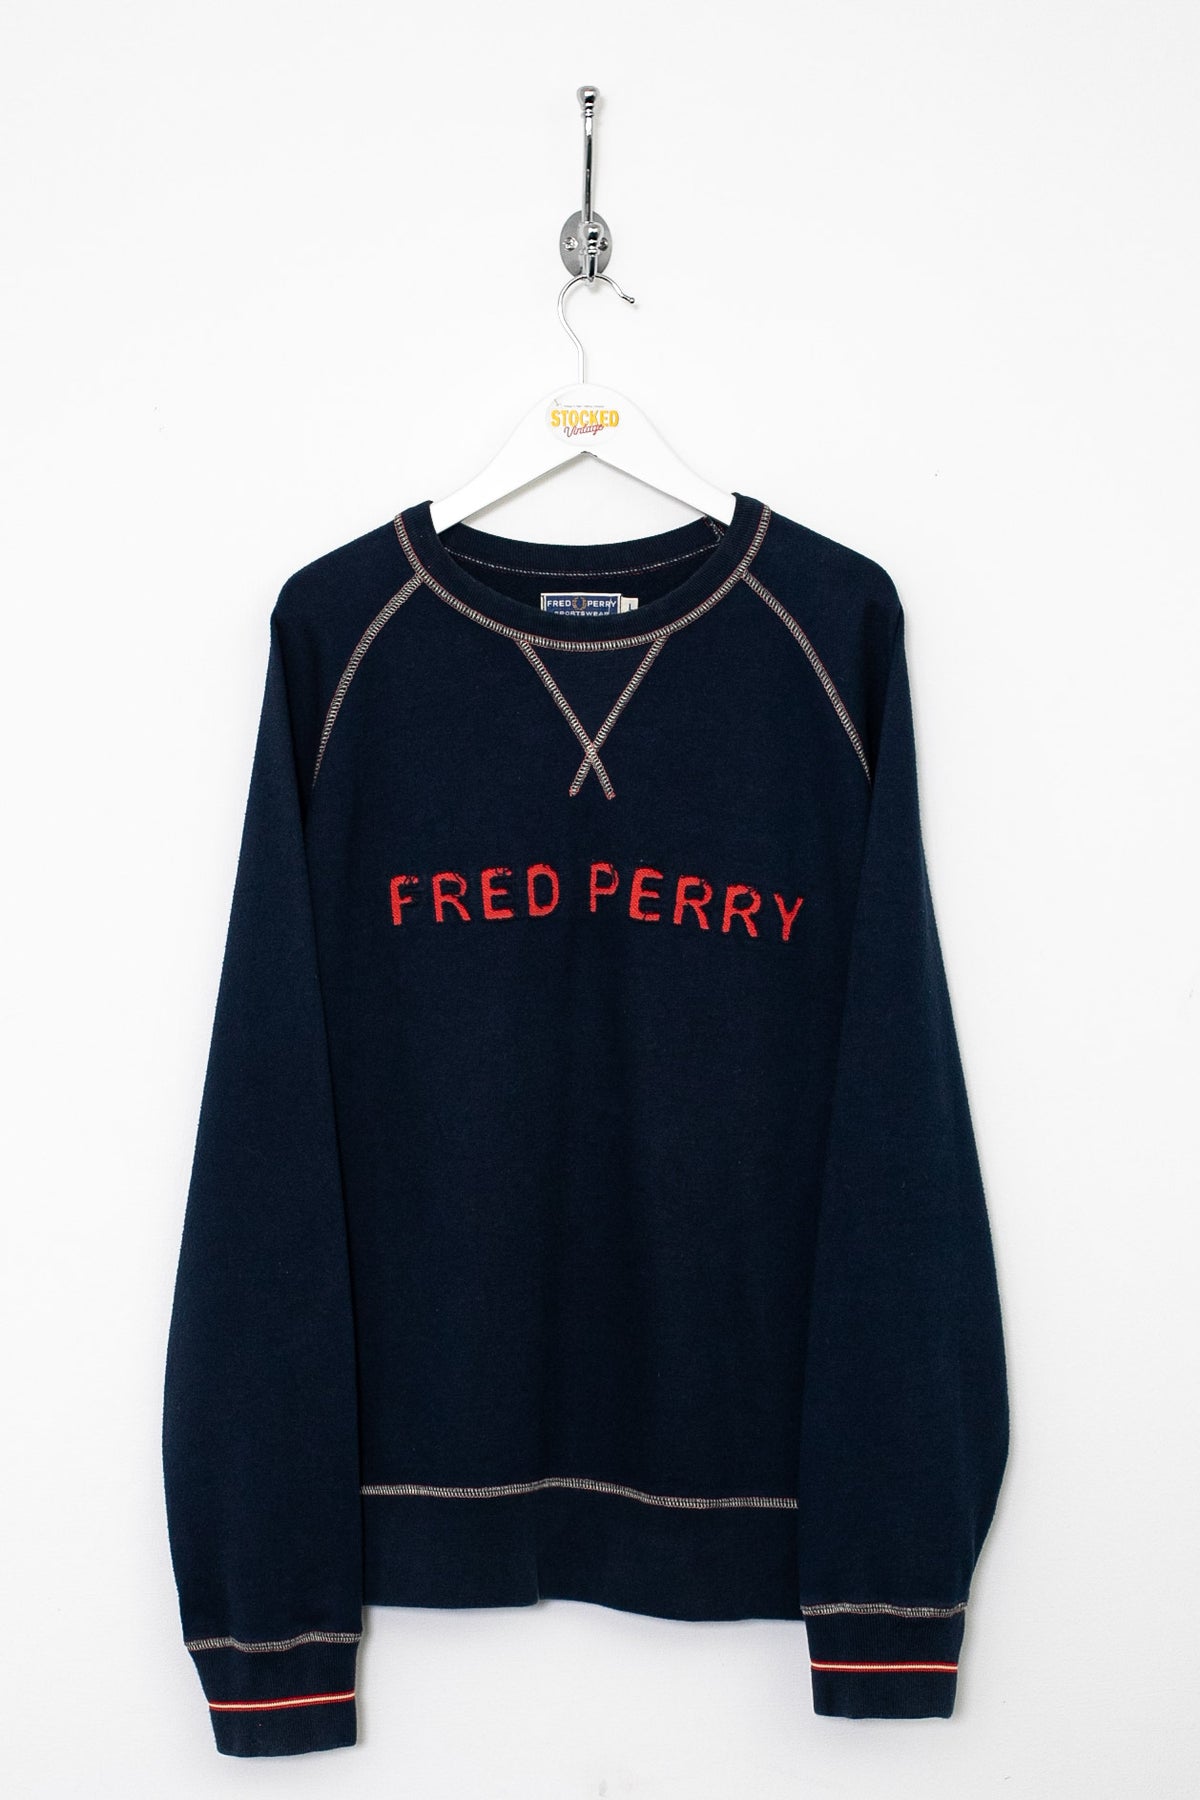 00s Fred Perry Sweatshirt (M)